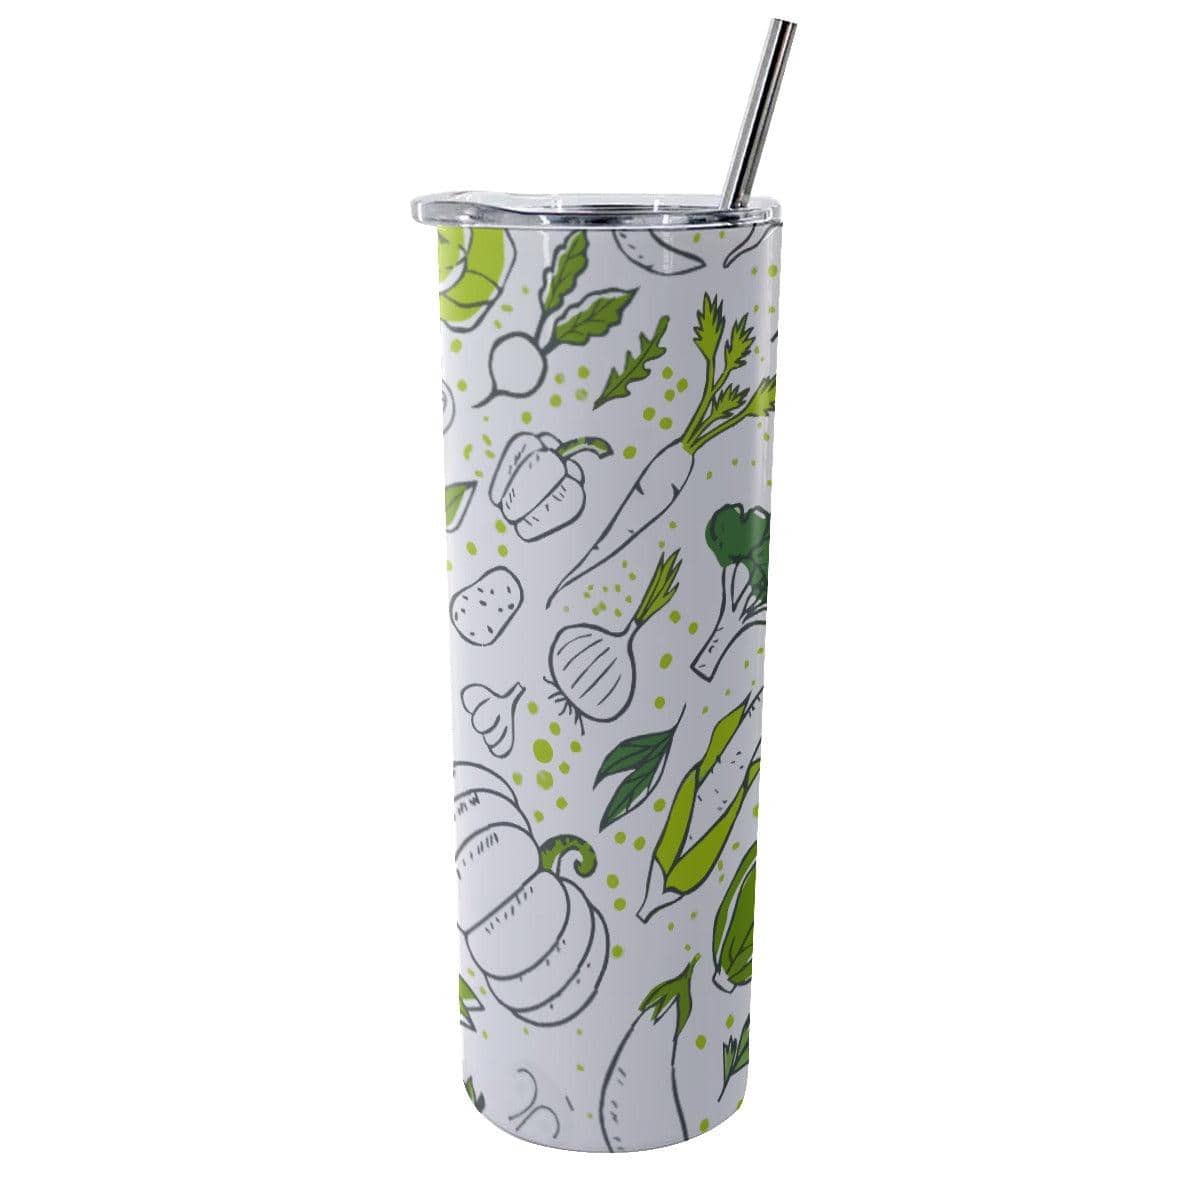 Leafy Greens Tumbler With Stainless Steel Straw 20oz - Thumbedtreats